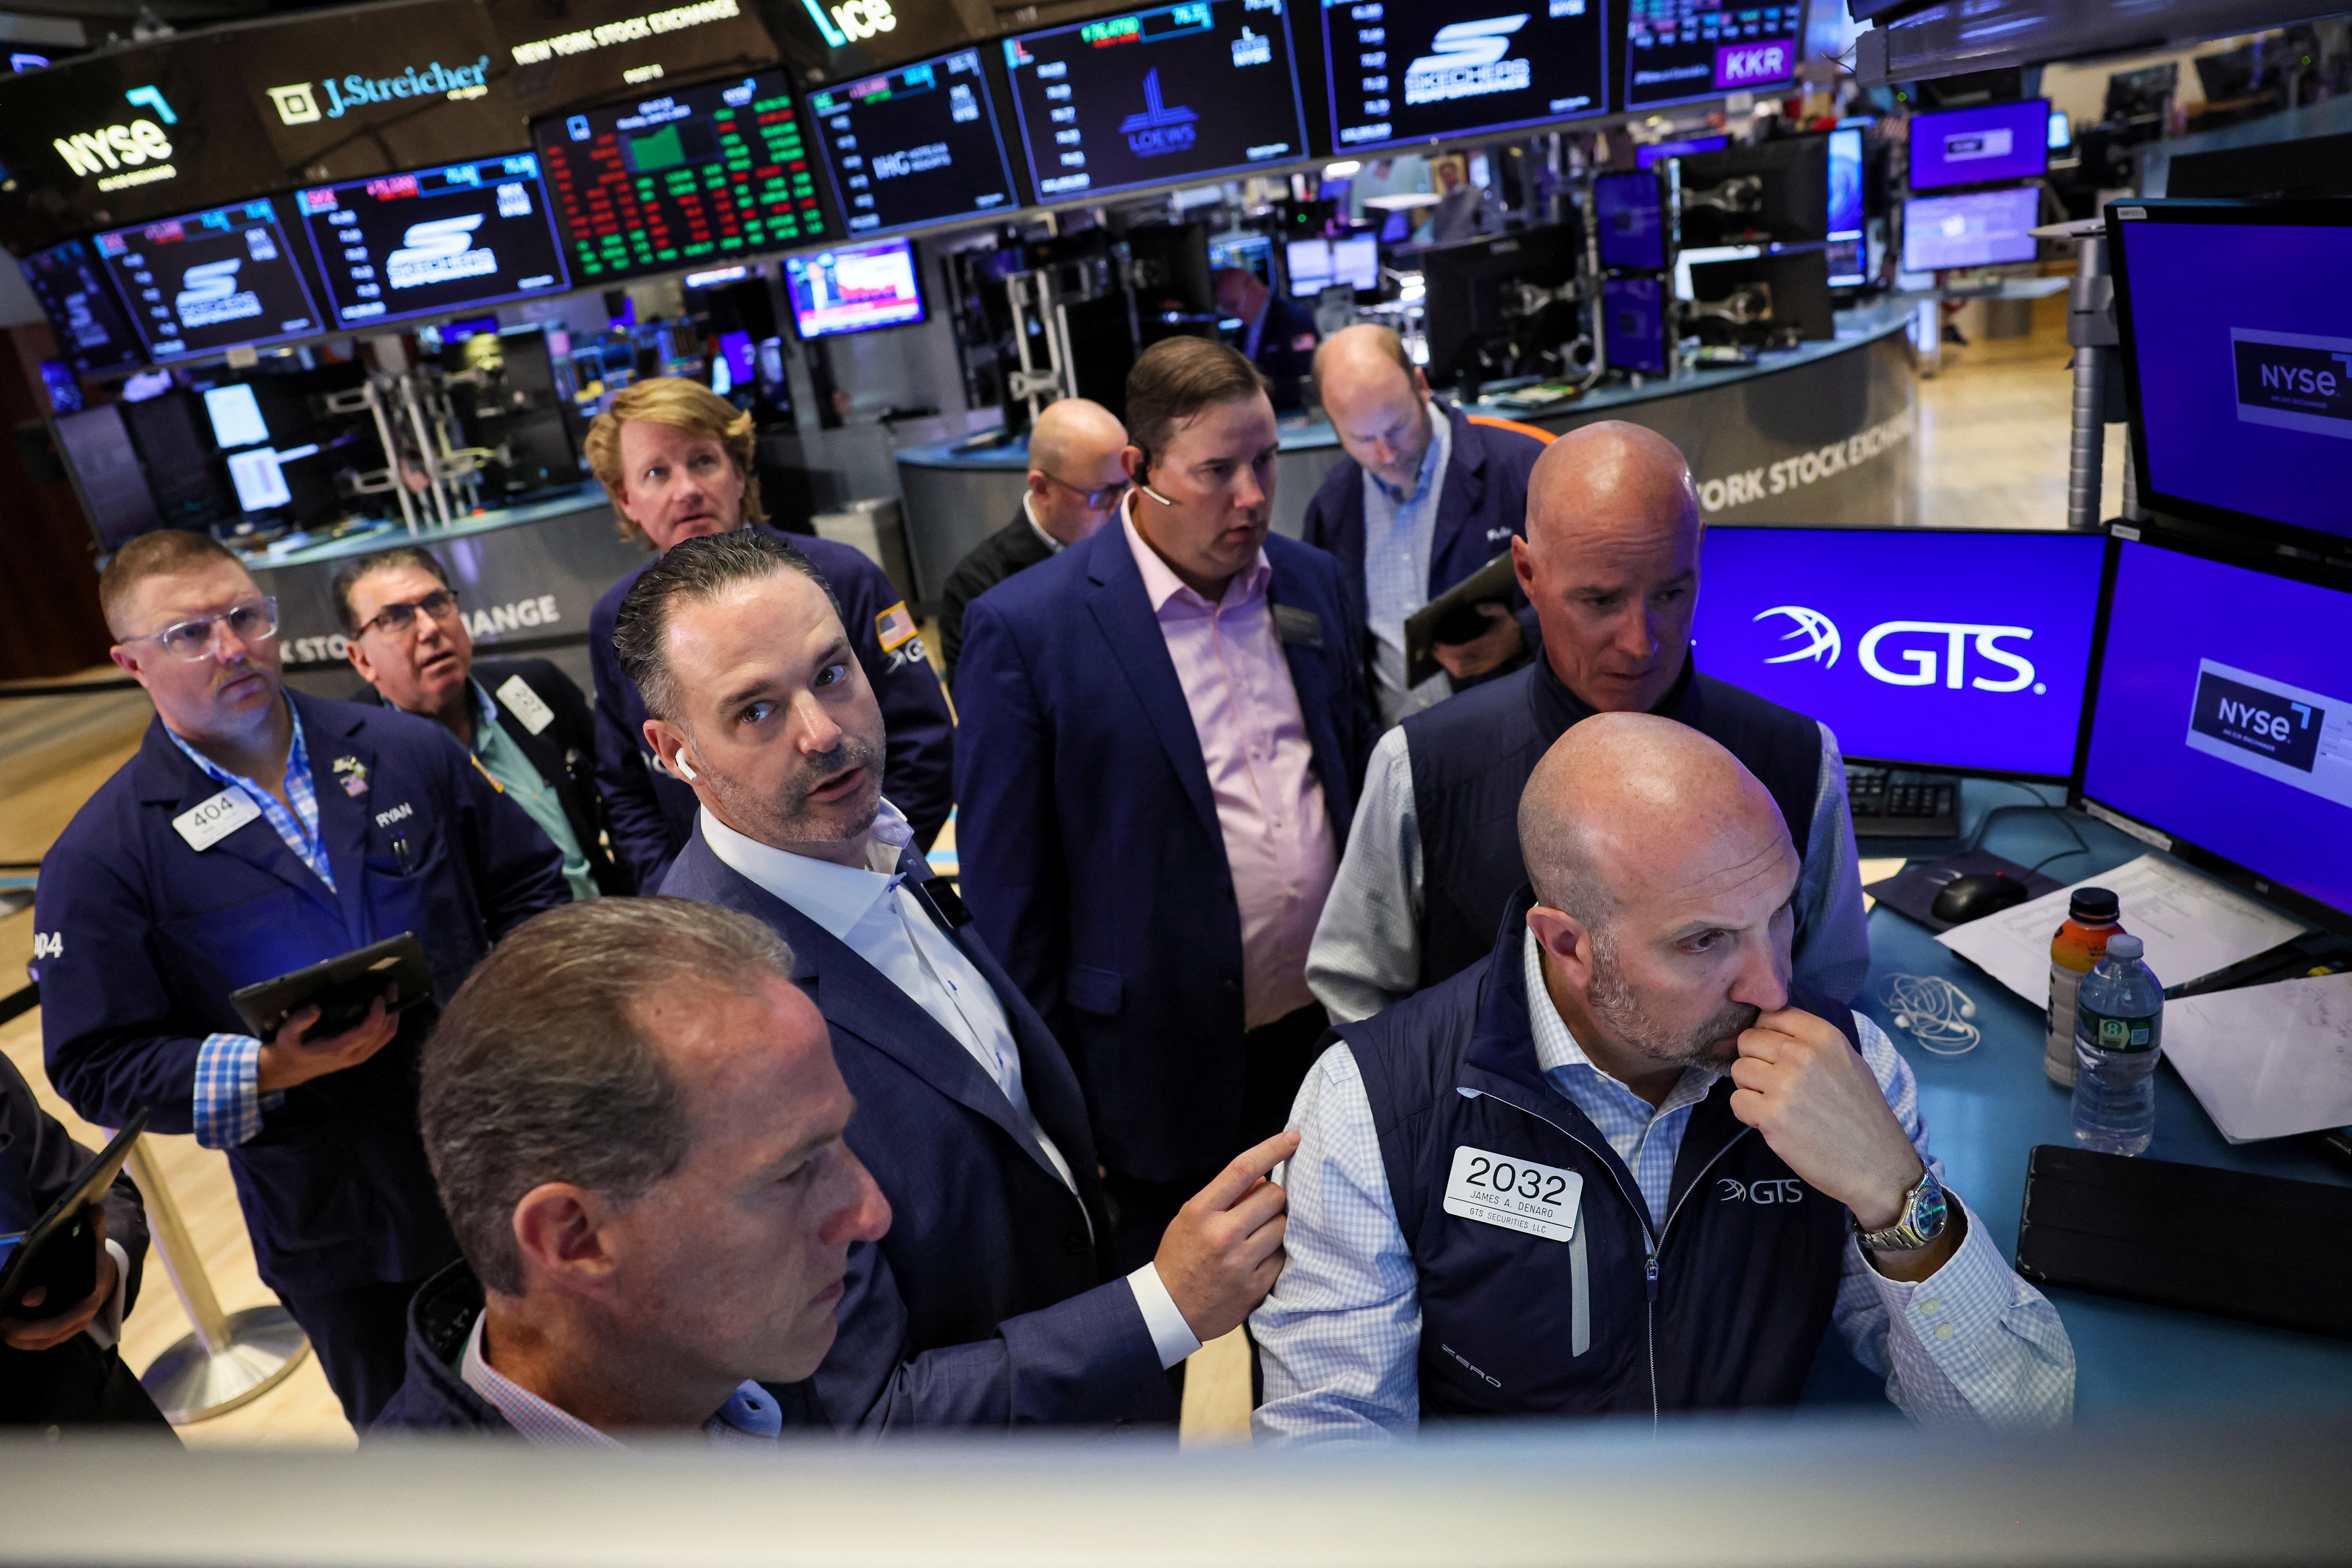 Traders and floor officials react to technical issues on the floor of the NYSE in New York